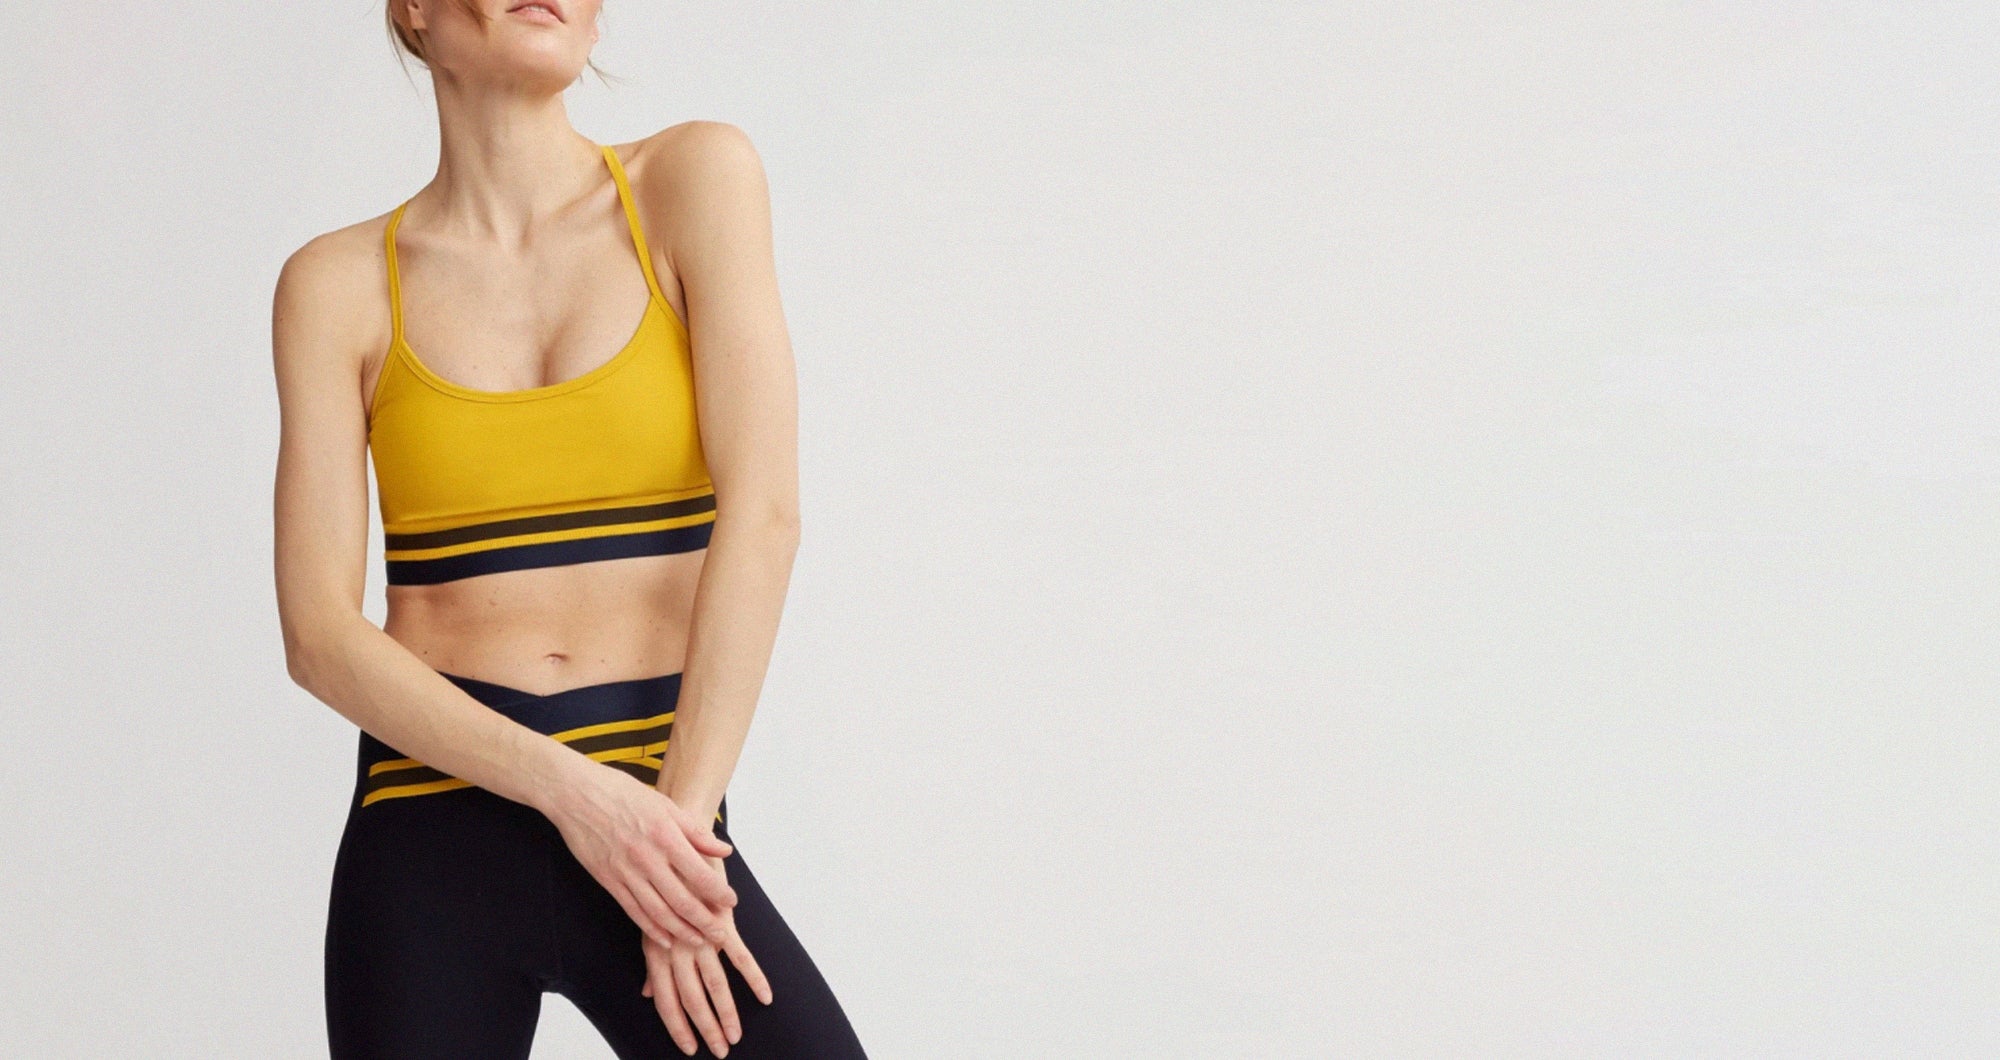 Fig. A - Apparel + Accessories For Those Passionate about Movement